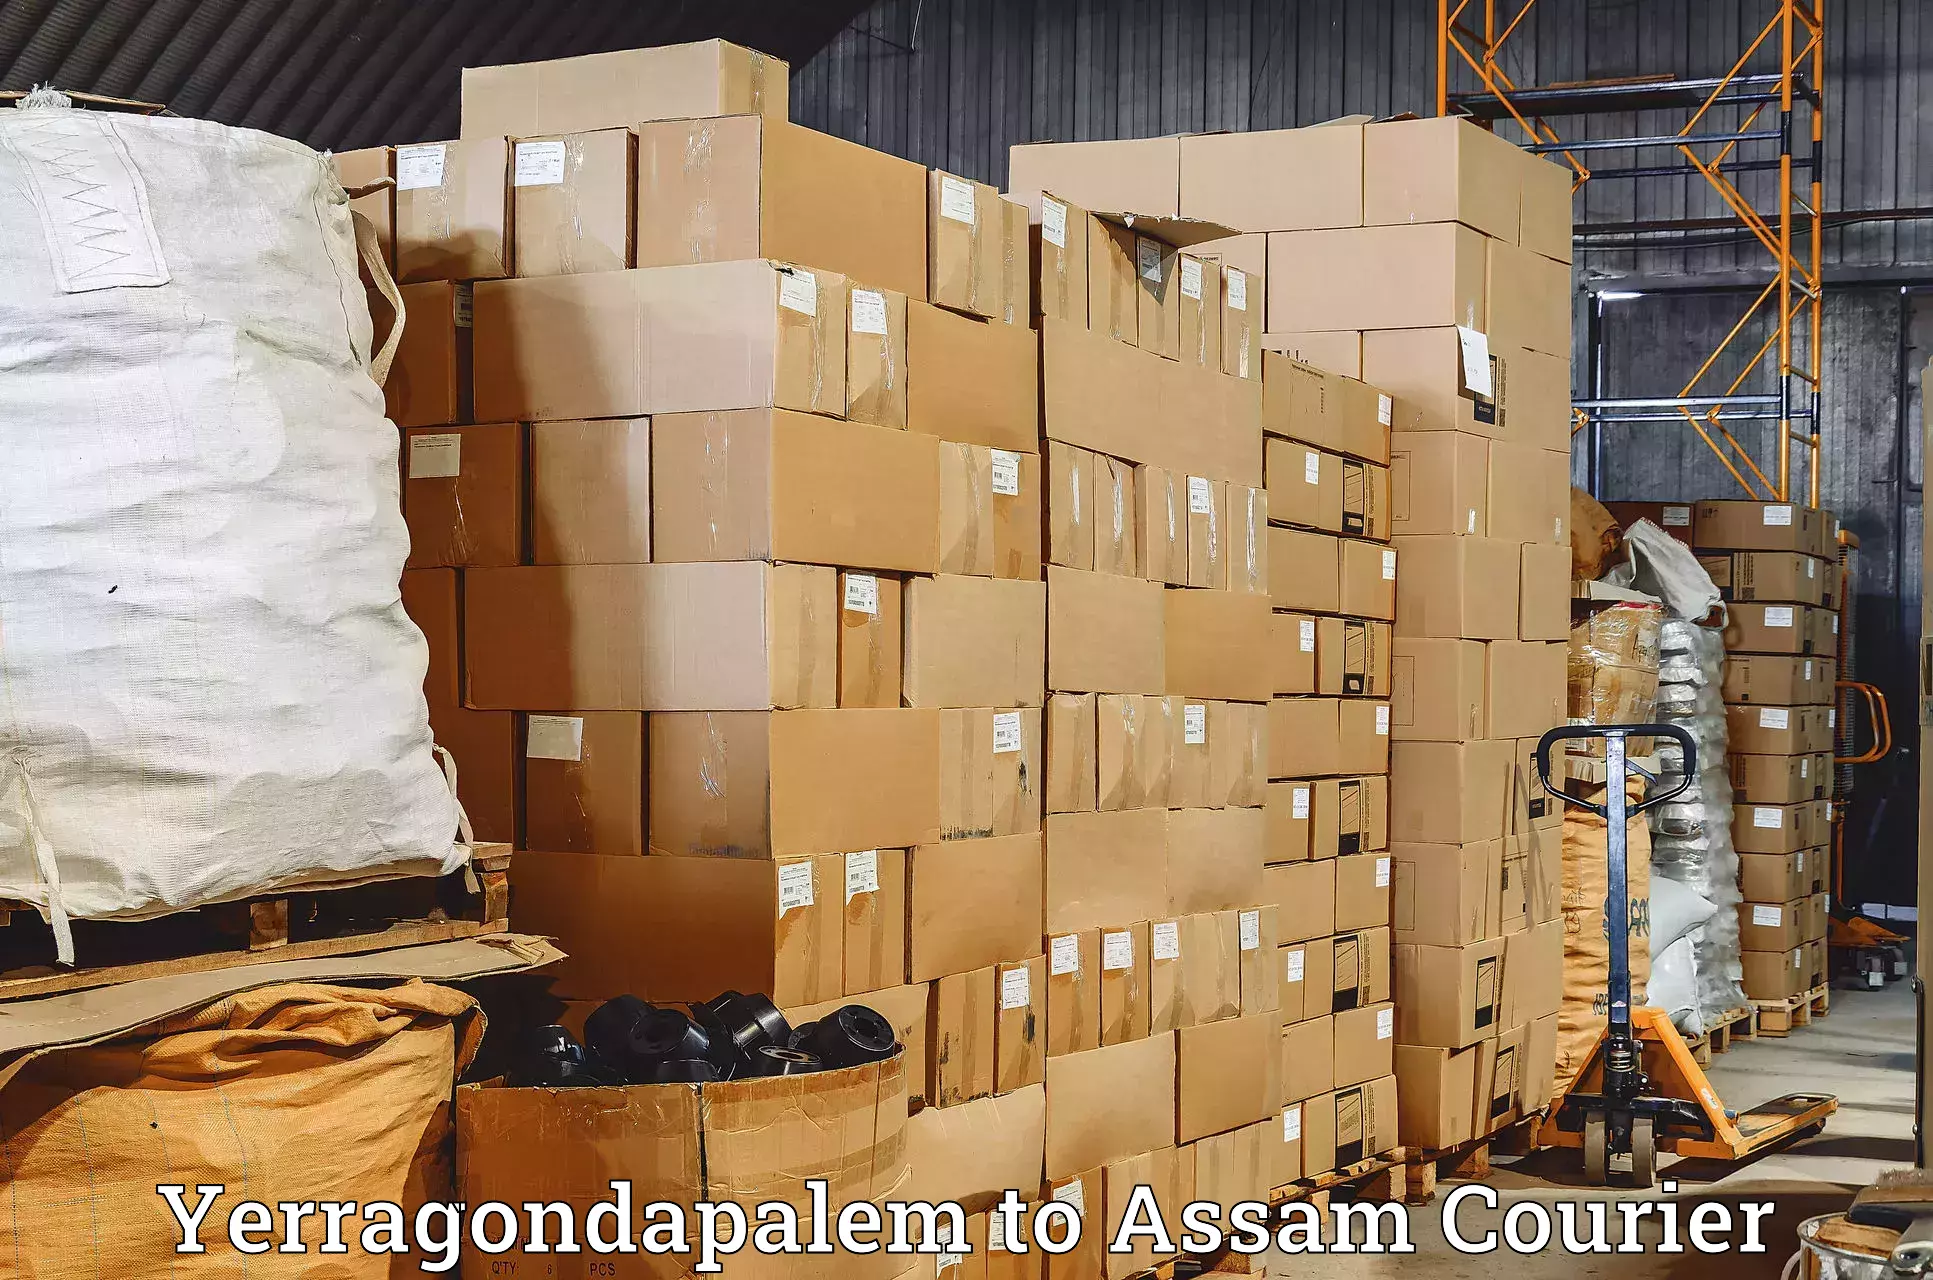 Reliable courier service in Yerragondapalem to Assam